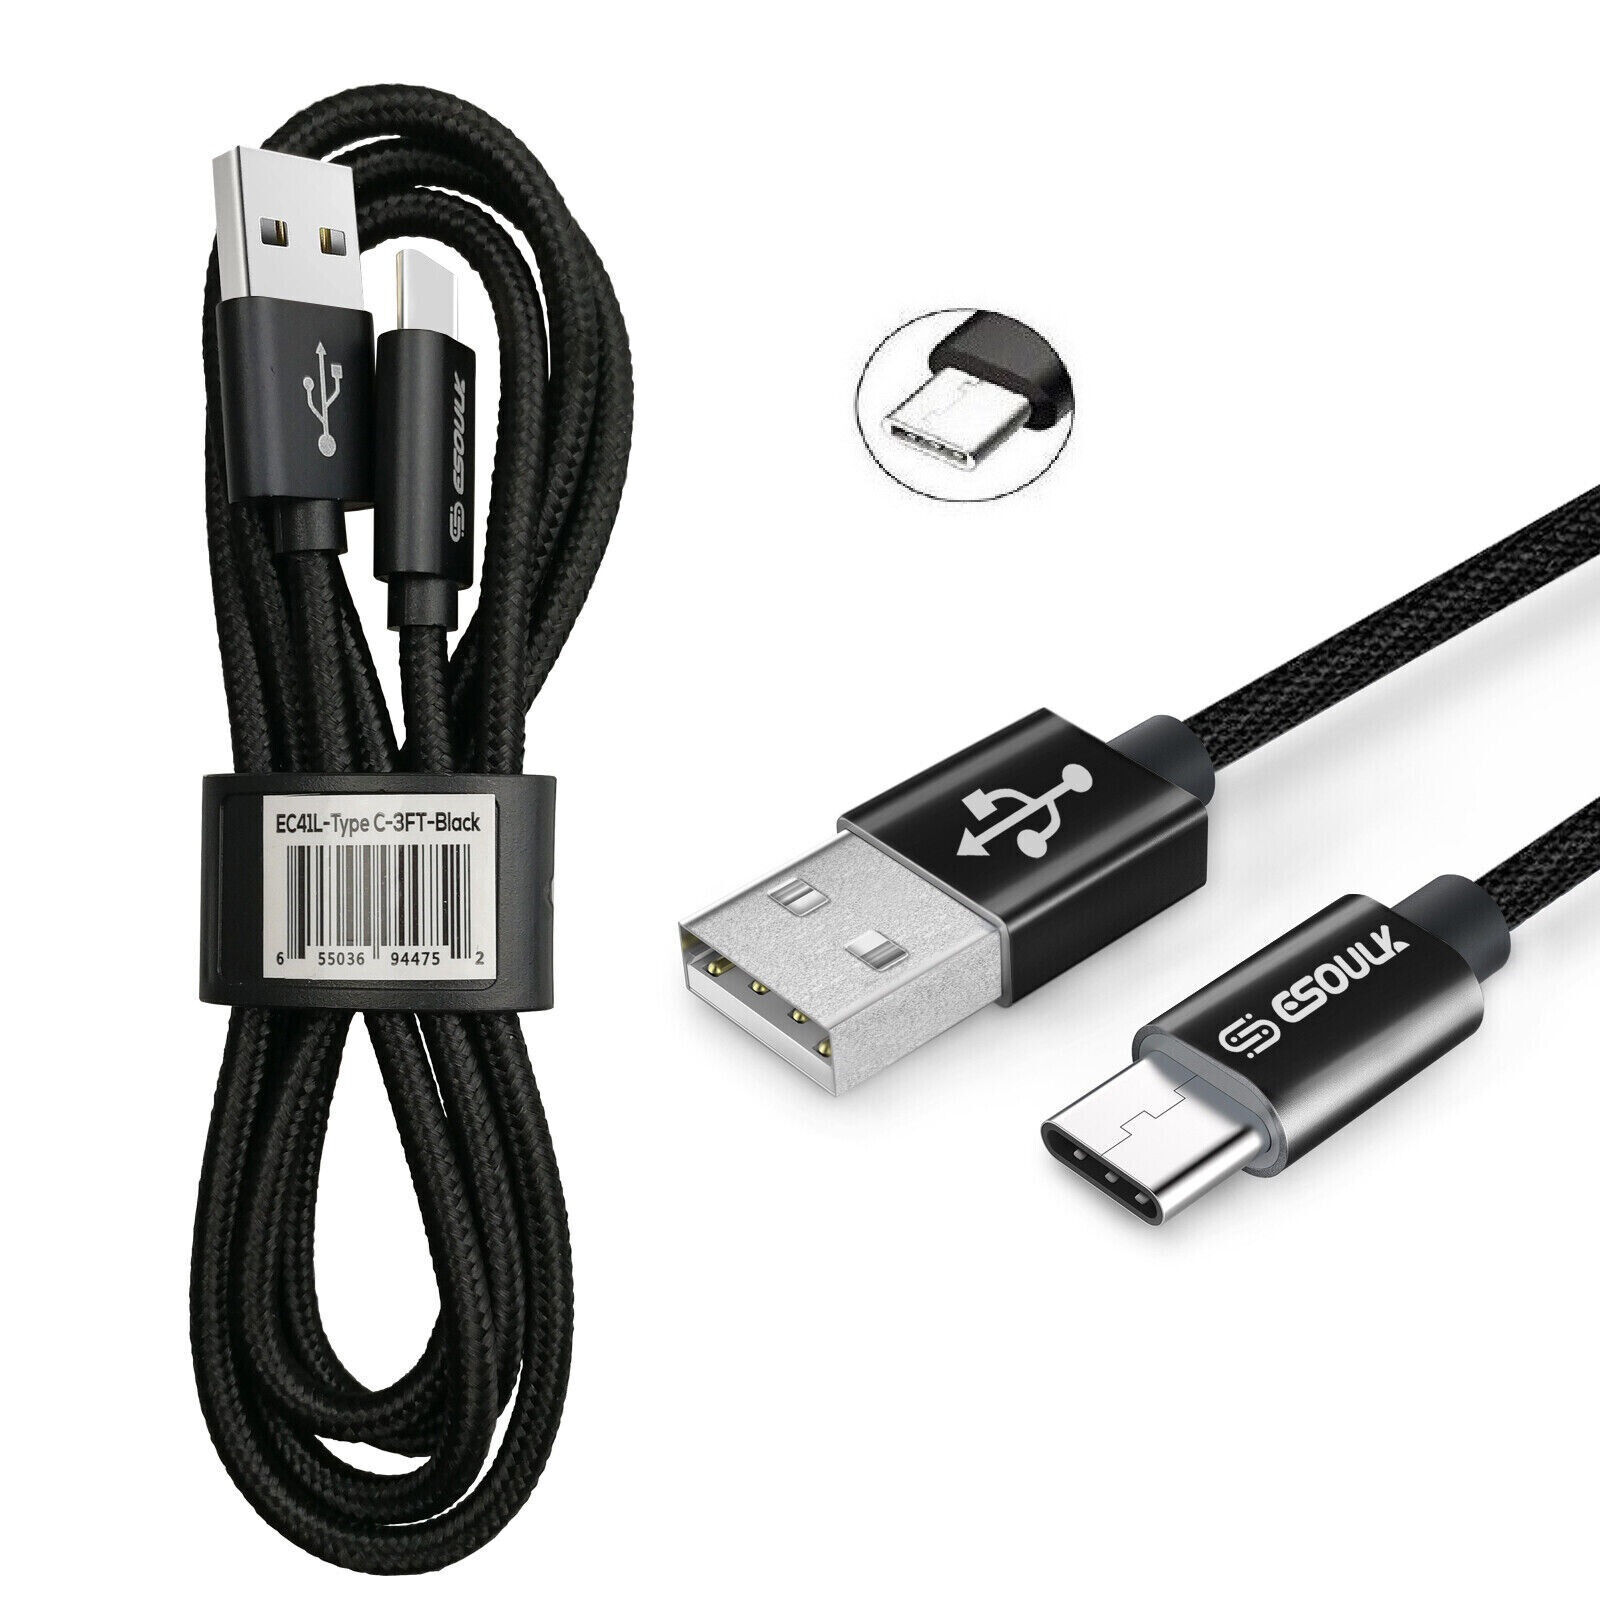 Type C Fast Charge 3.1 USB Cable For Cricket Vision Plus Vision+ - $9.36